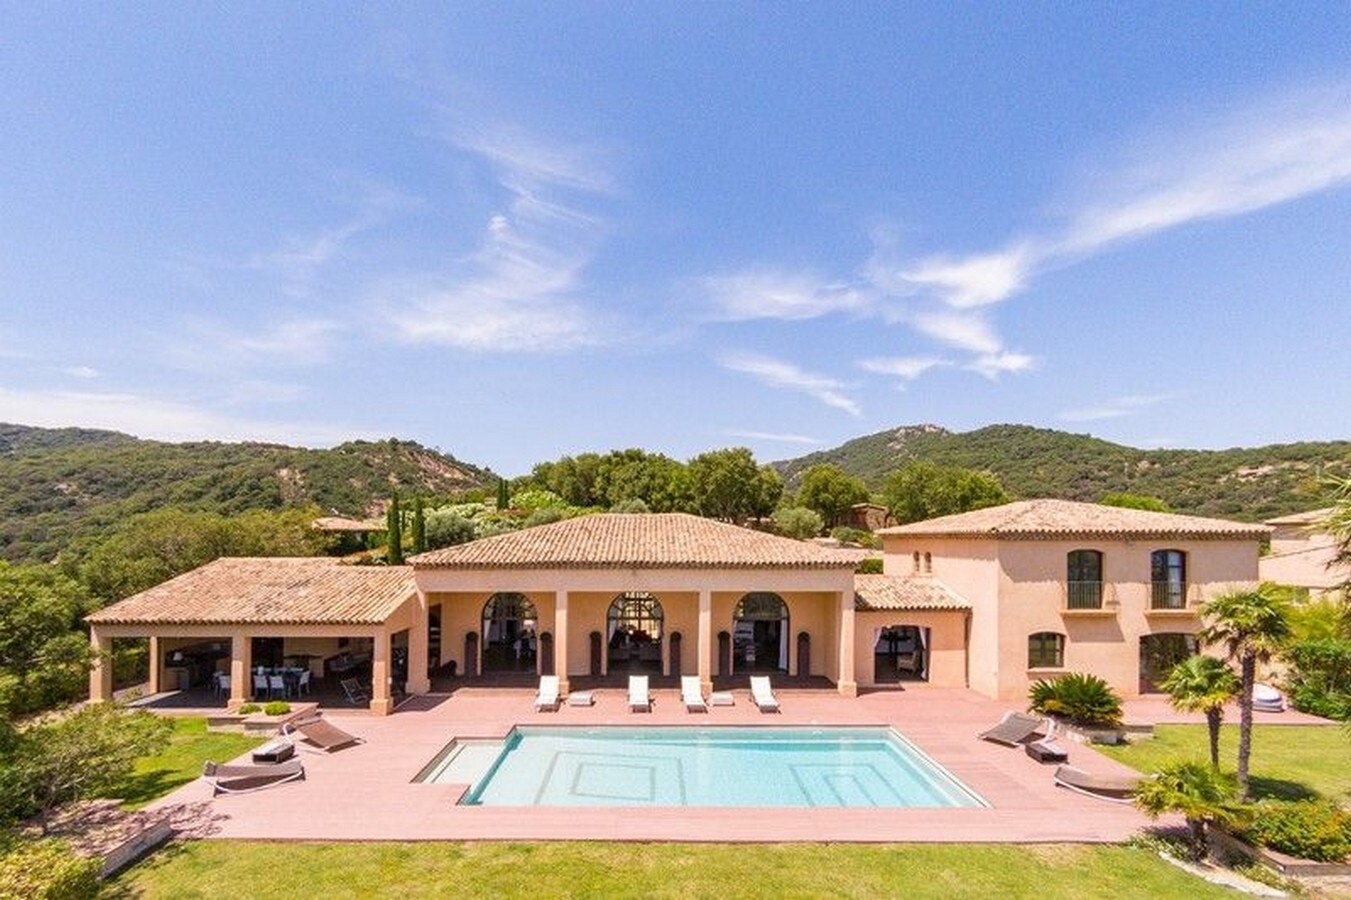 Property Image 1 - Luxurious spacious 5 bedroom villa with pool, AC and sea view in Grimaud